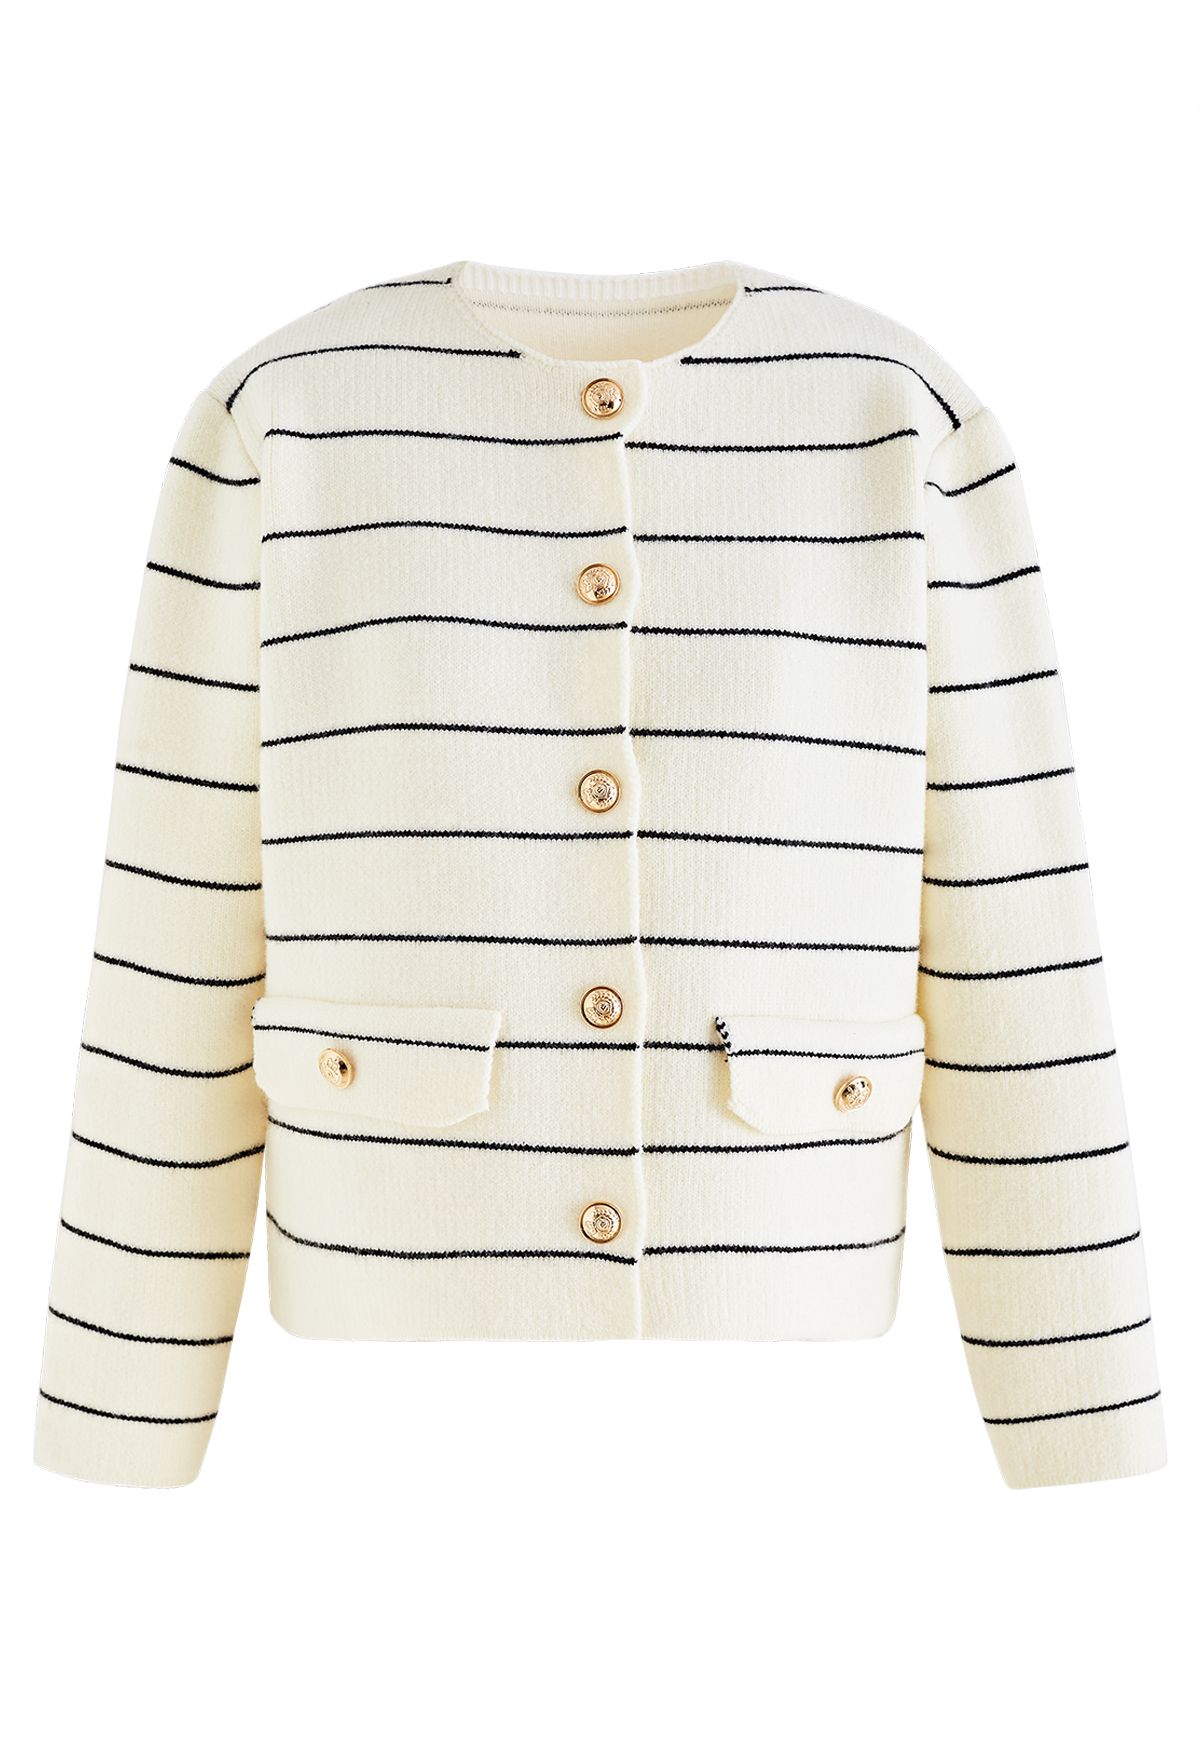 Contrast Stripes Button Down Cardigan in Ivory